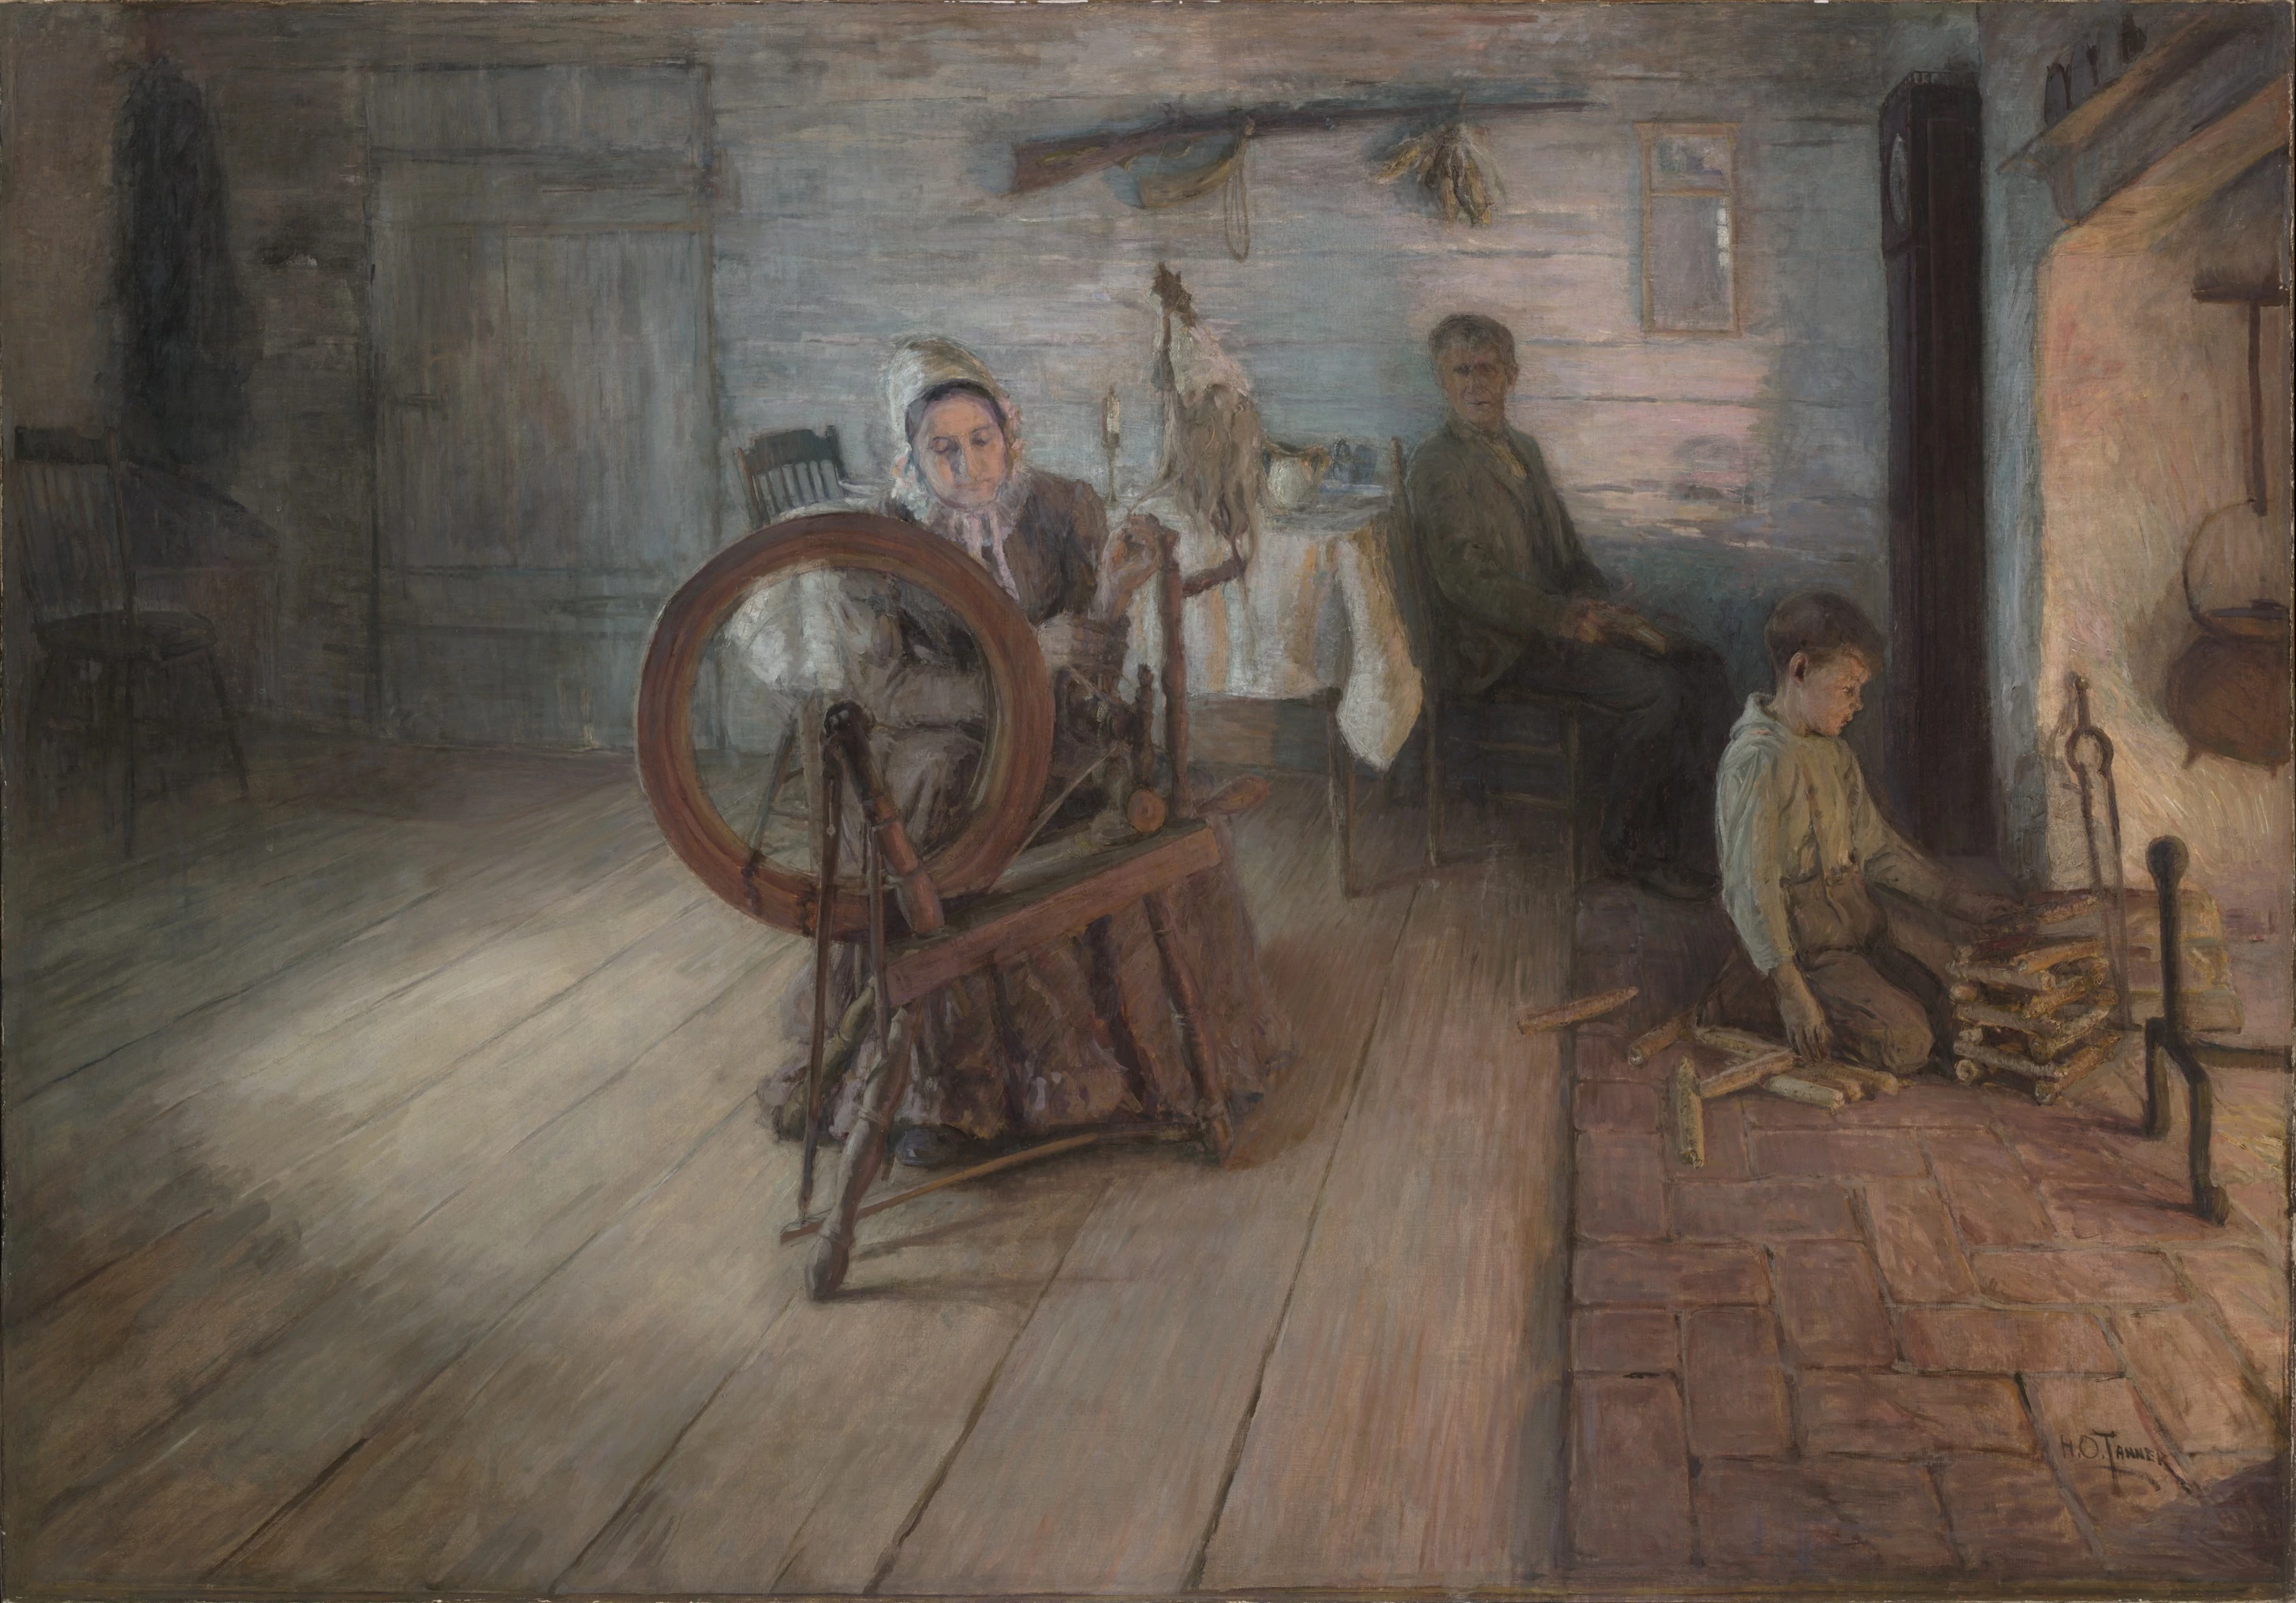 Spinning By Firelight, Henry Ossawa Tanner